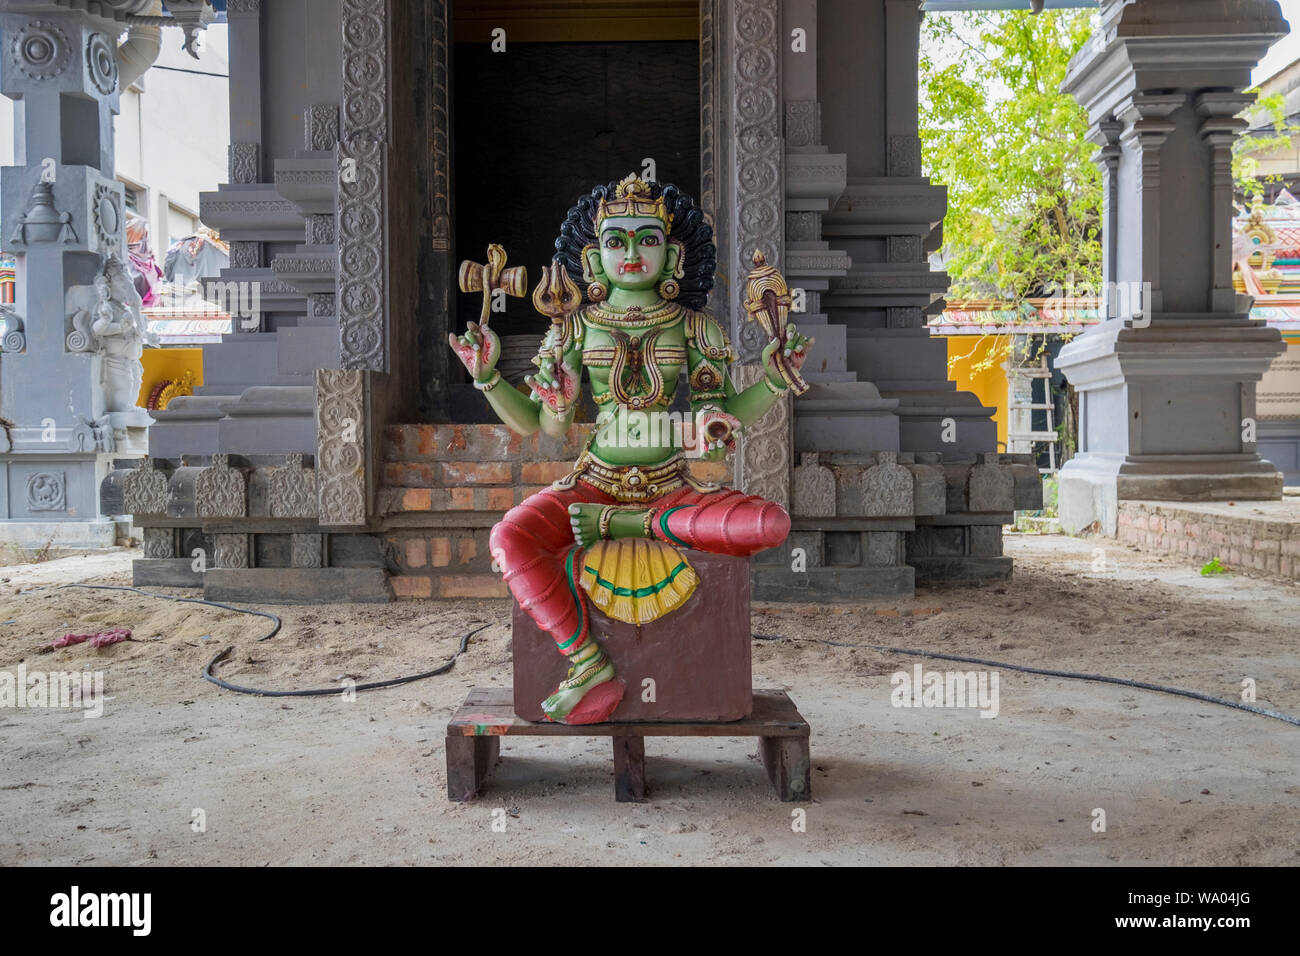 A renovated Hindu God statue sits waiting to be placed at a Dravidian style Hindu temple in Port Dickson, Malaysia. Stock Photo